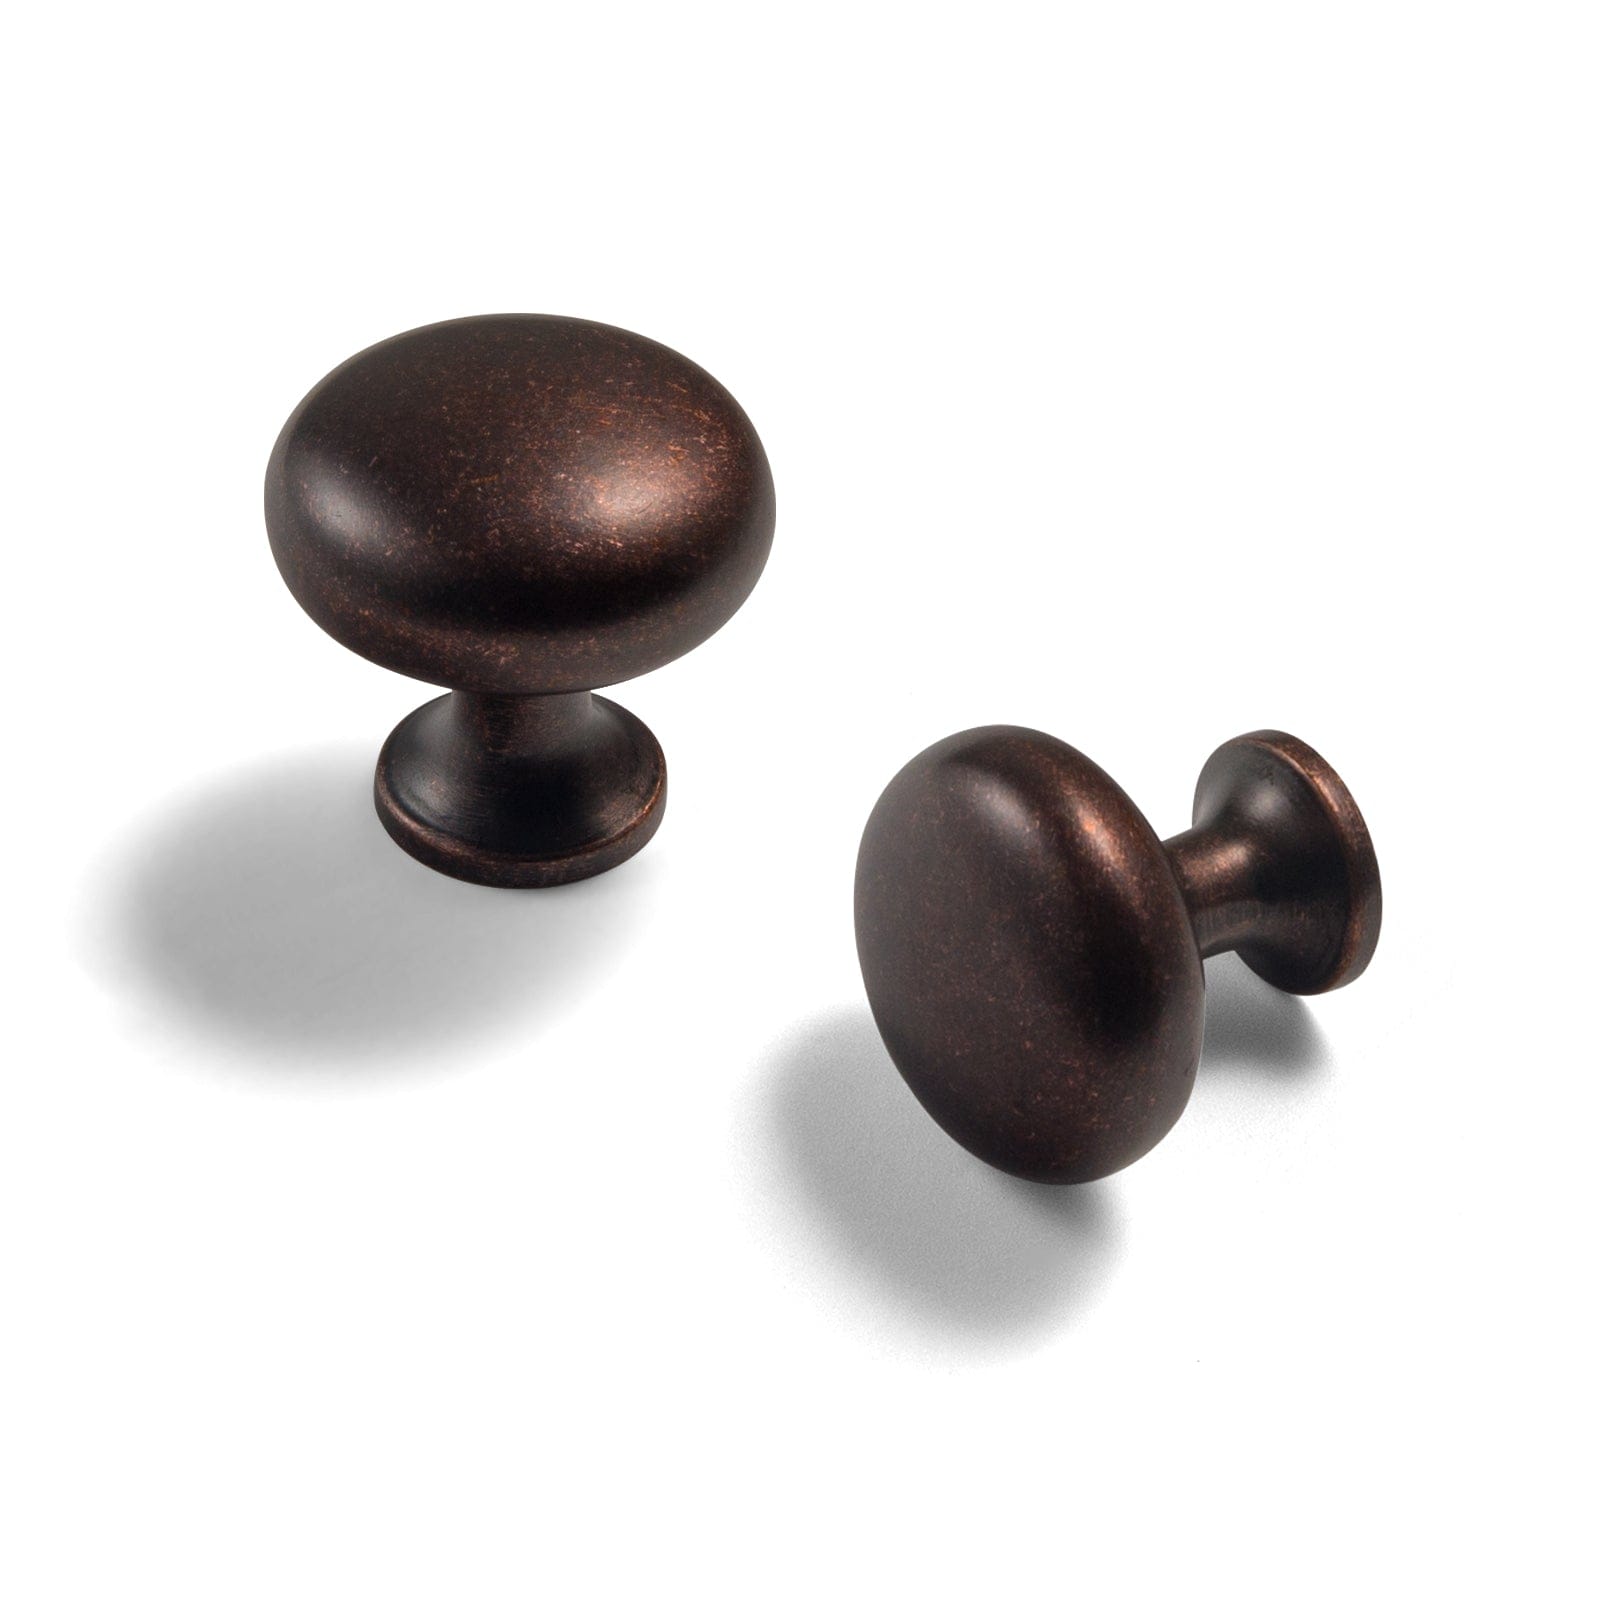 Goo-Ki Antique Oil Rubbed Bronze / Knob / 6 Pack Retro Durable Cabinet Pulls Luxurious Drawer Pulls for Bedroom Kitchen